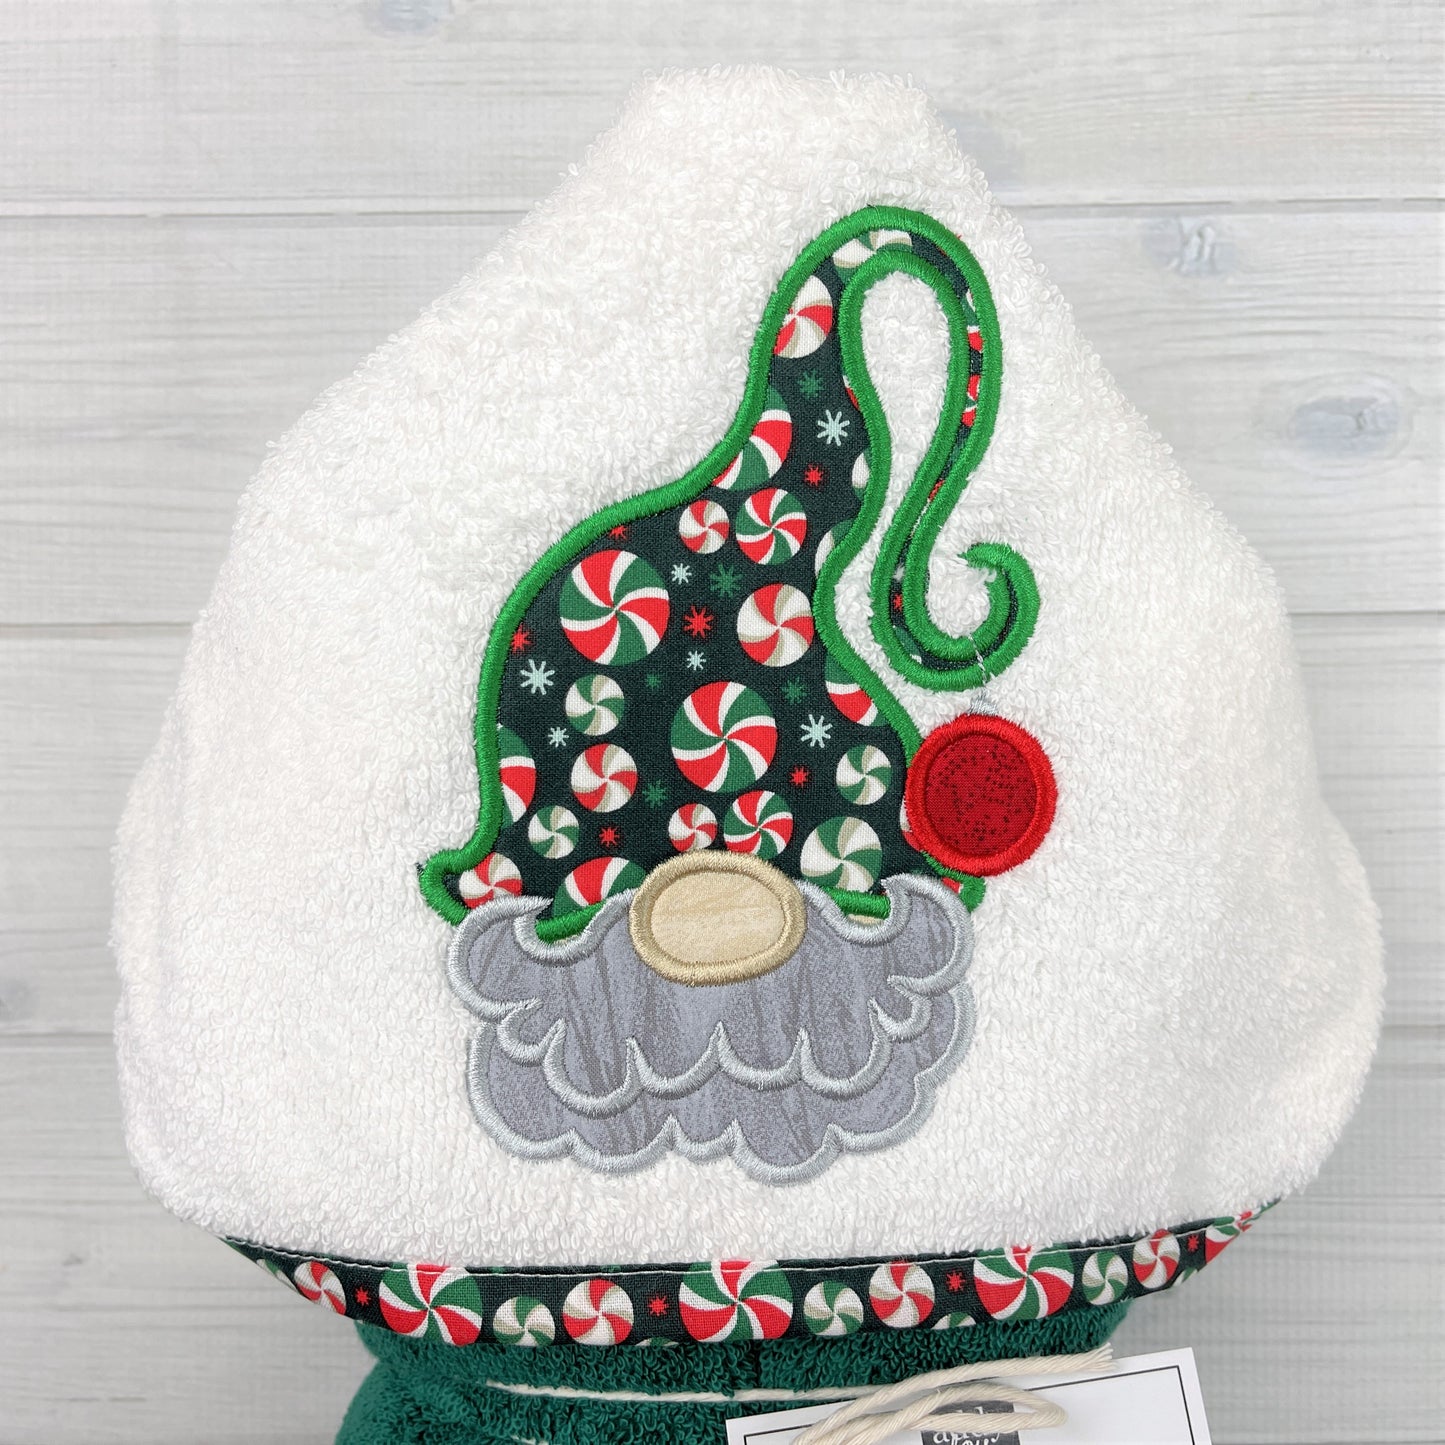 Hooded Towel | Holiday Gnome 1